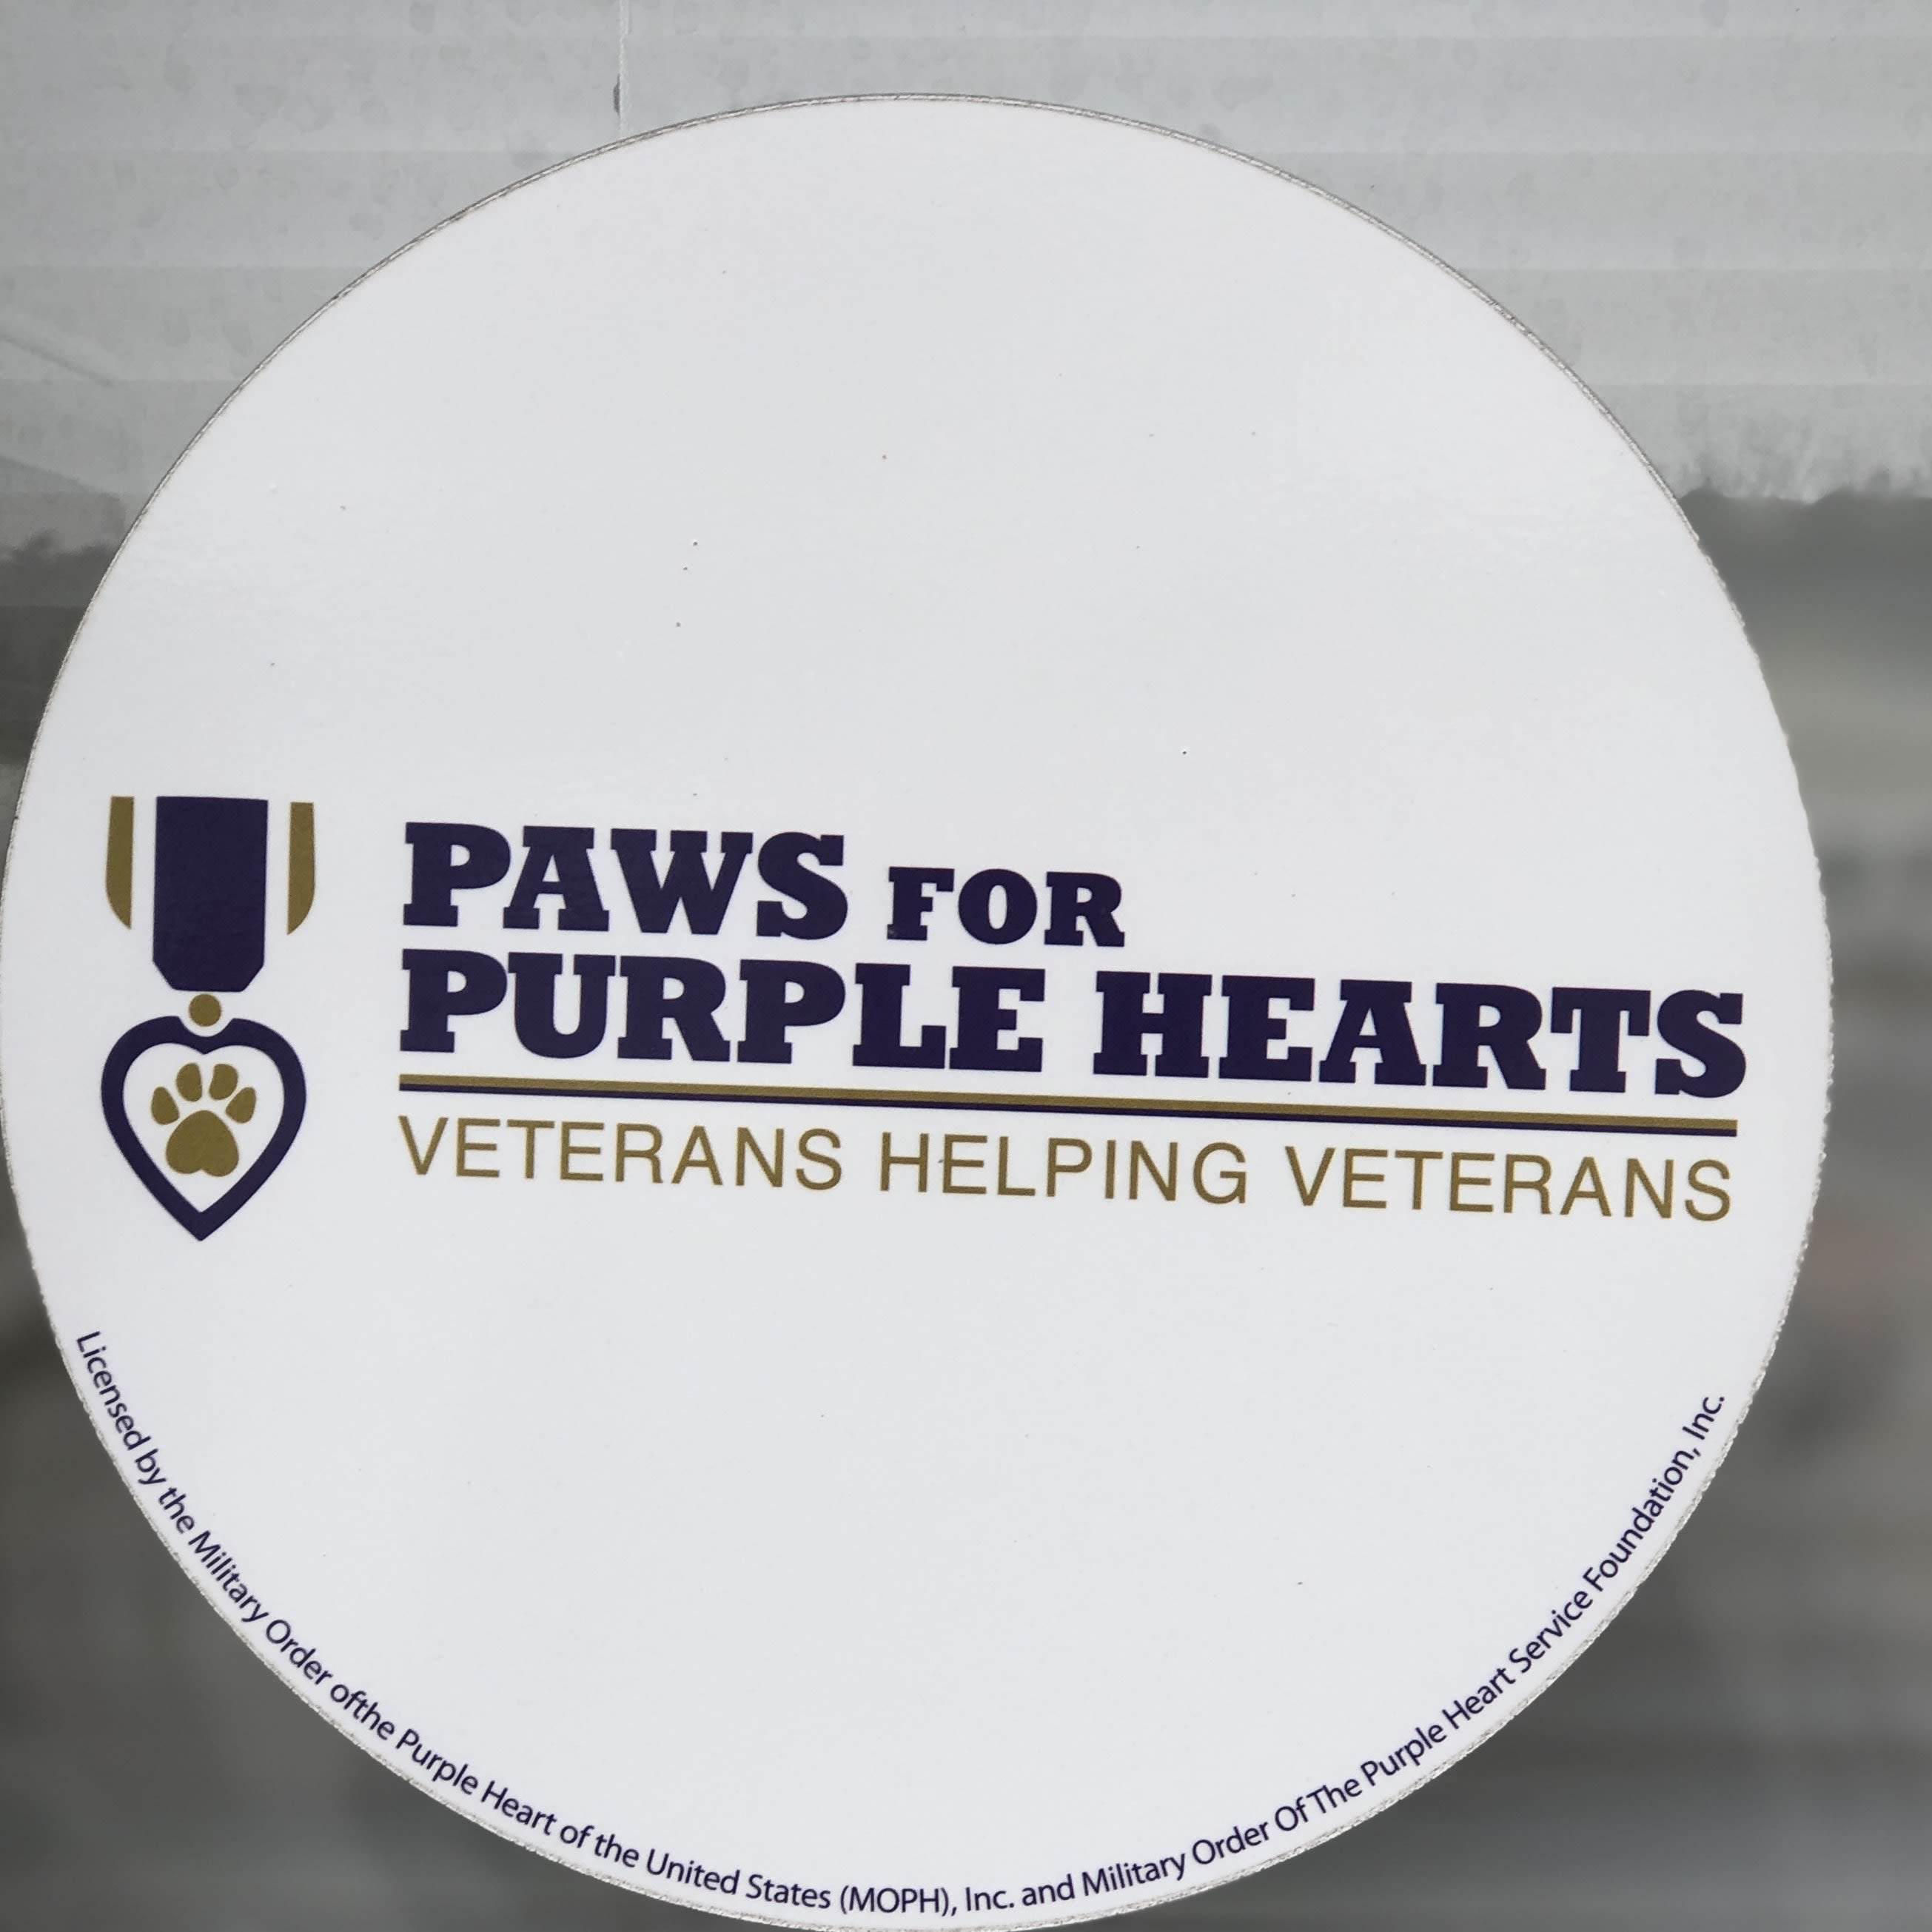 In the Community - Paws For Purple Hearts